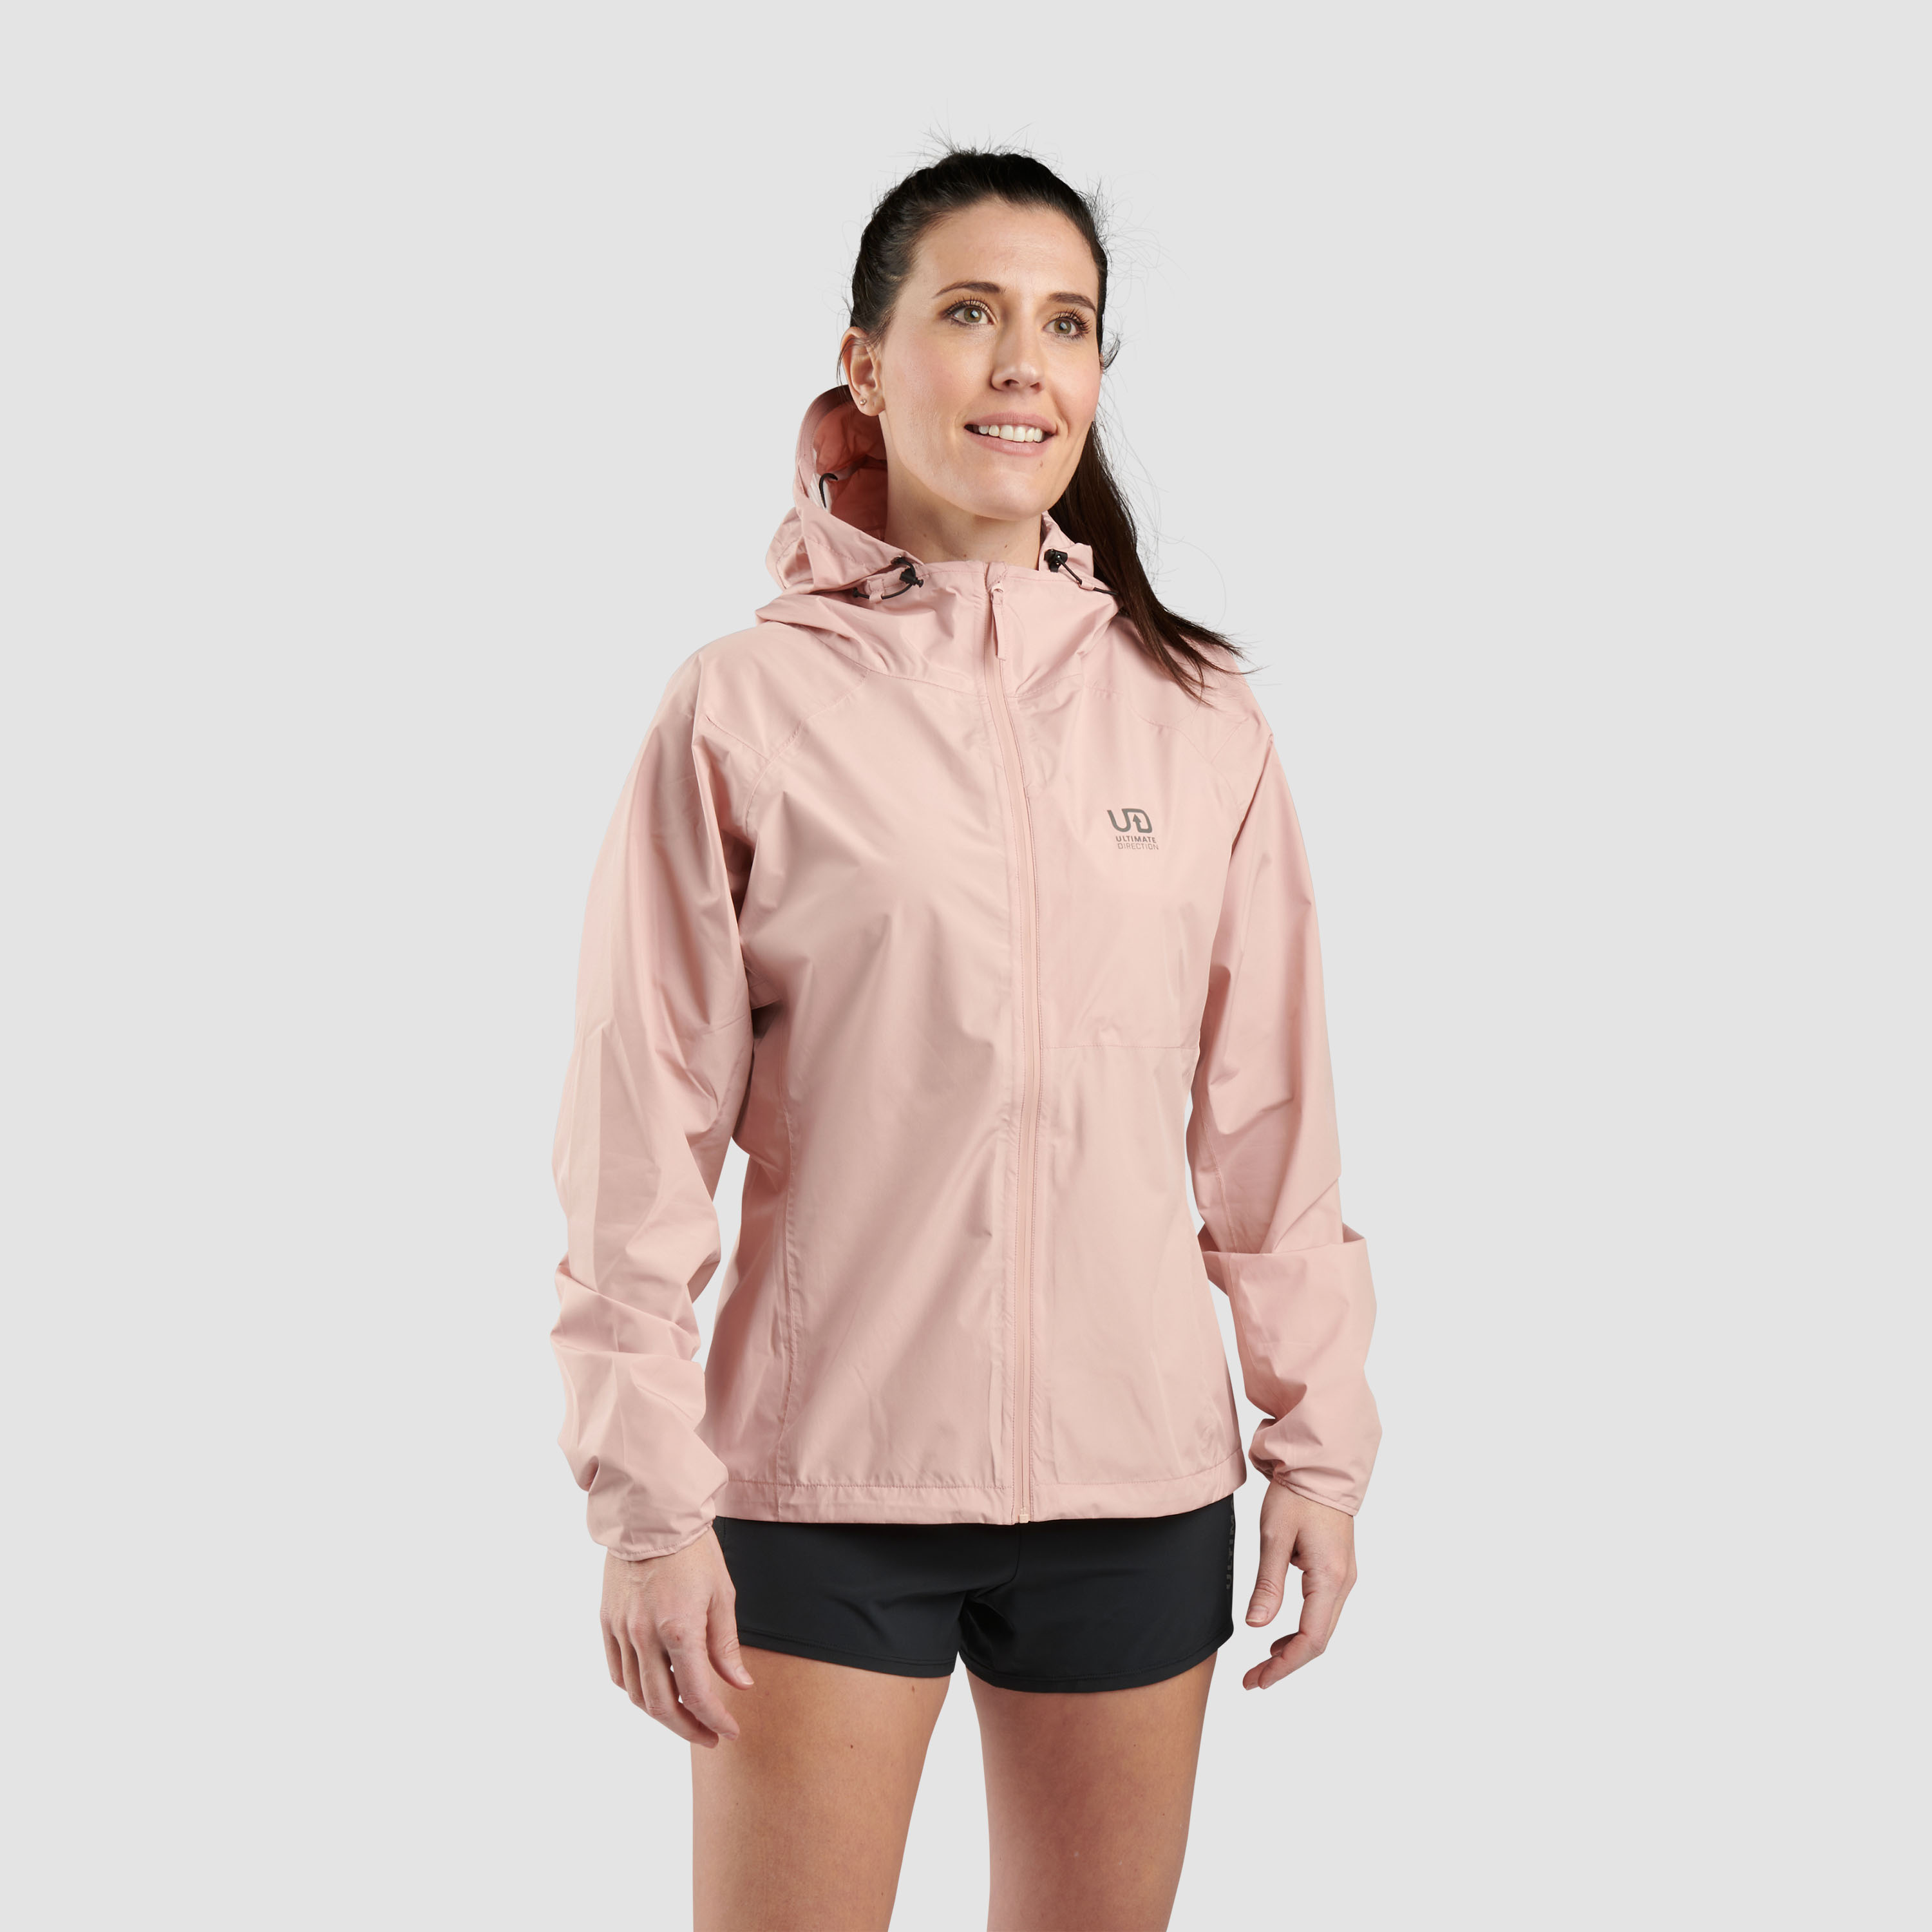 Ultimate Direction Women's Deluge Jacket in Clay Size Large